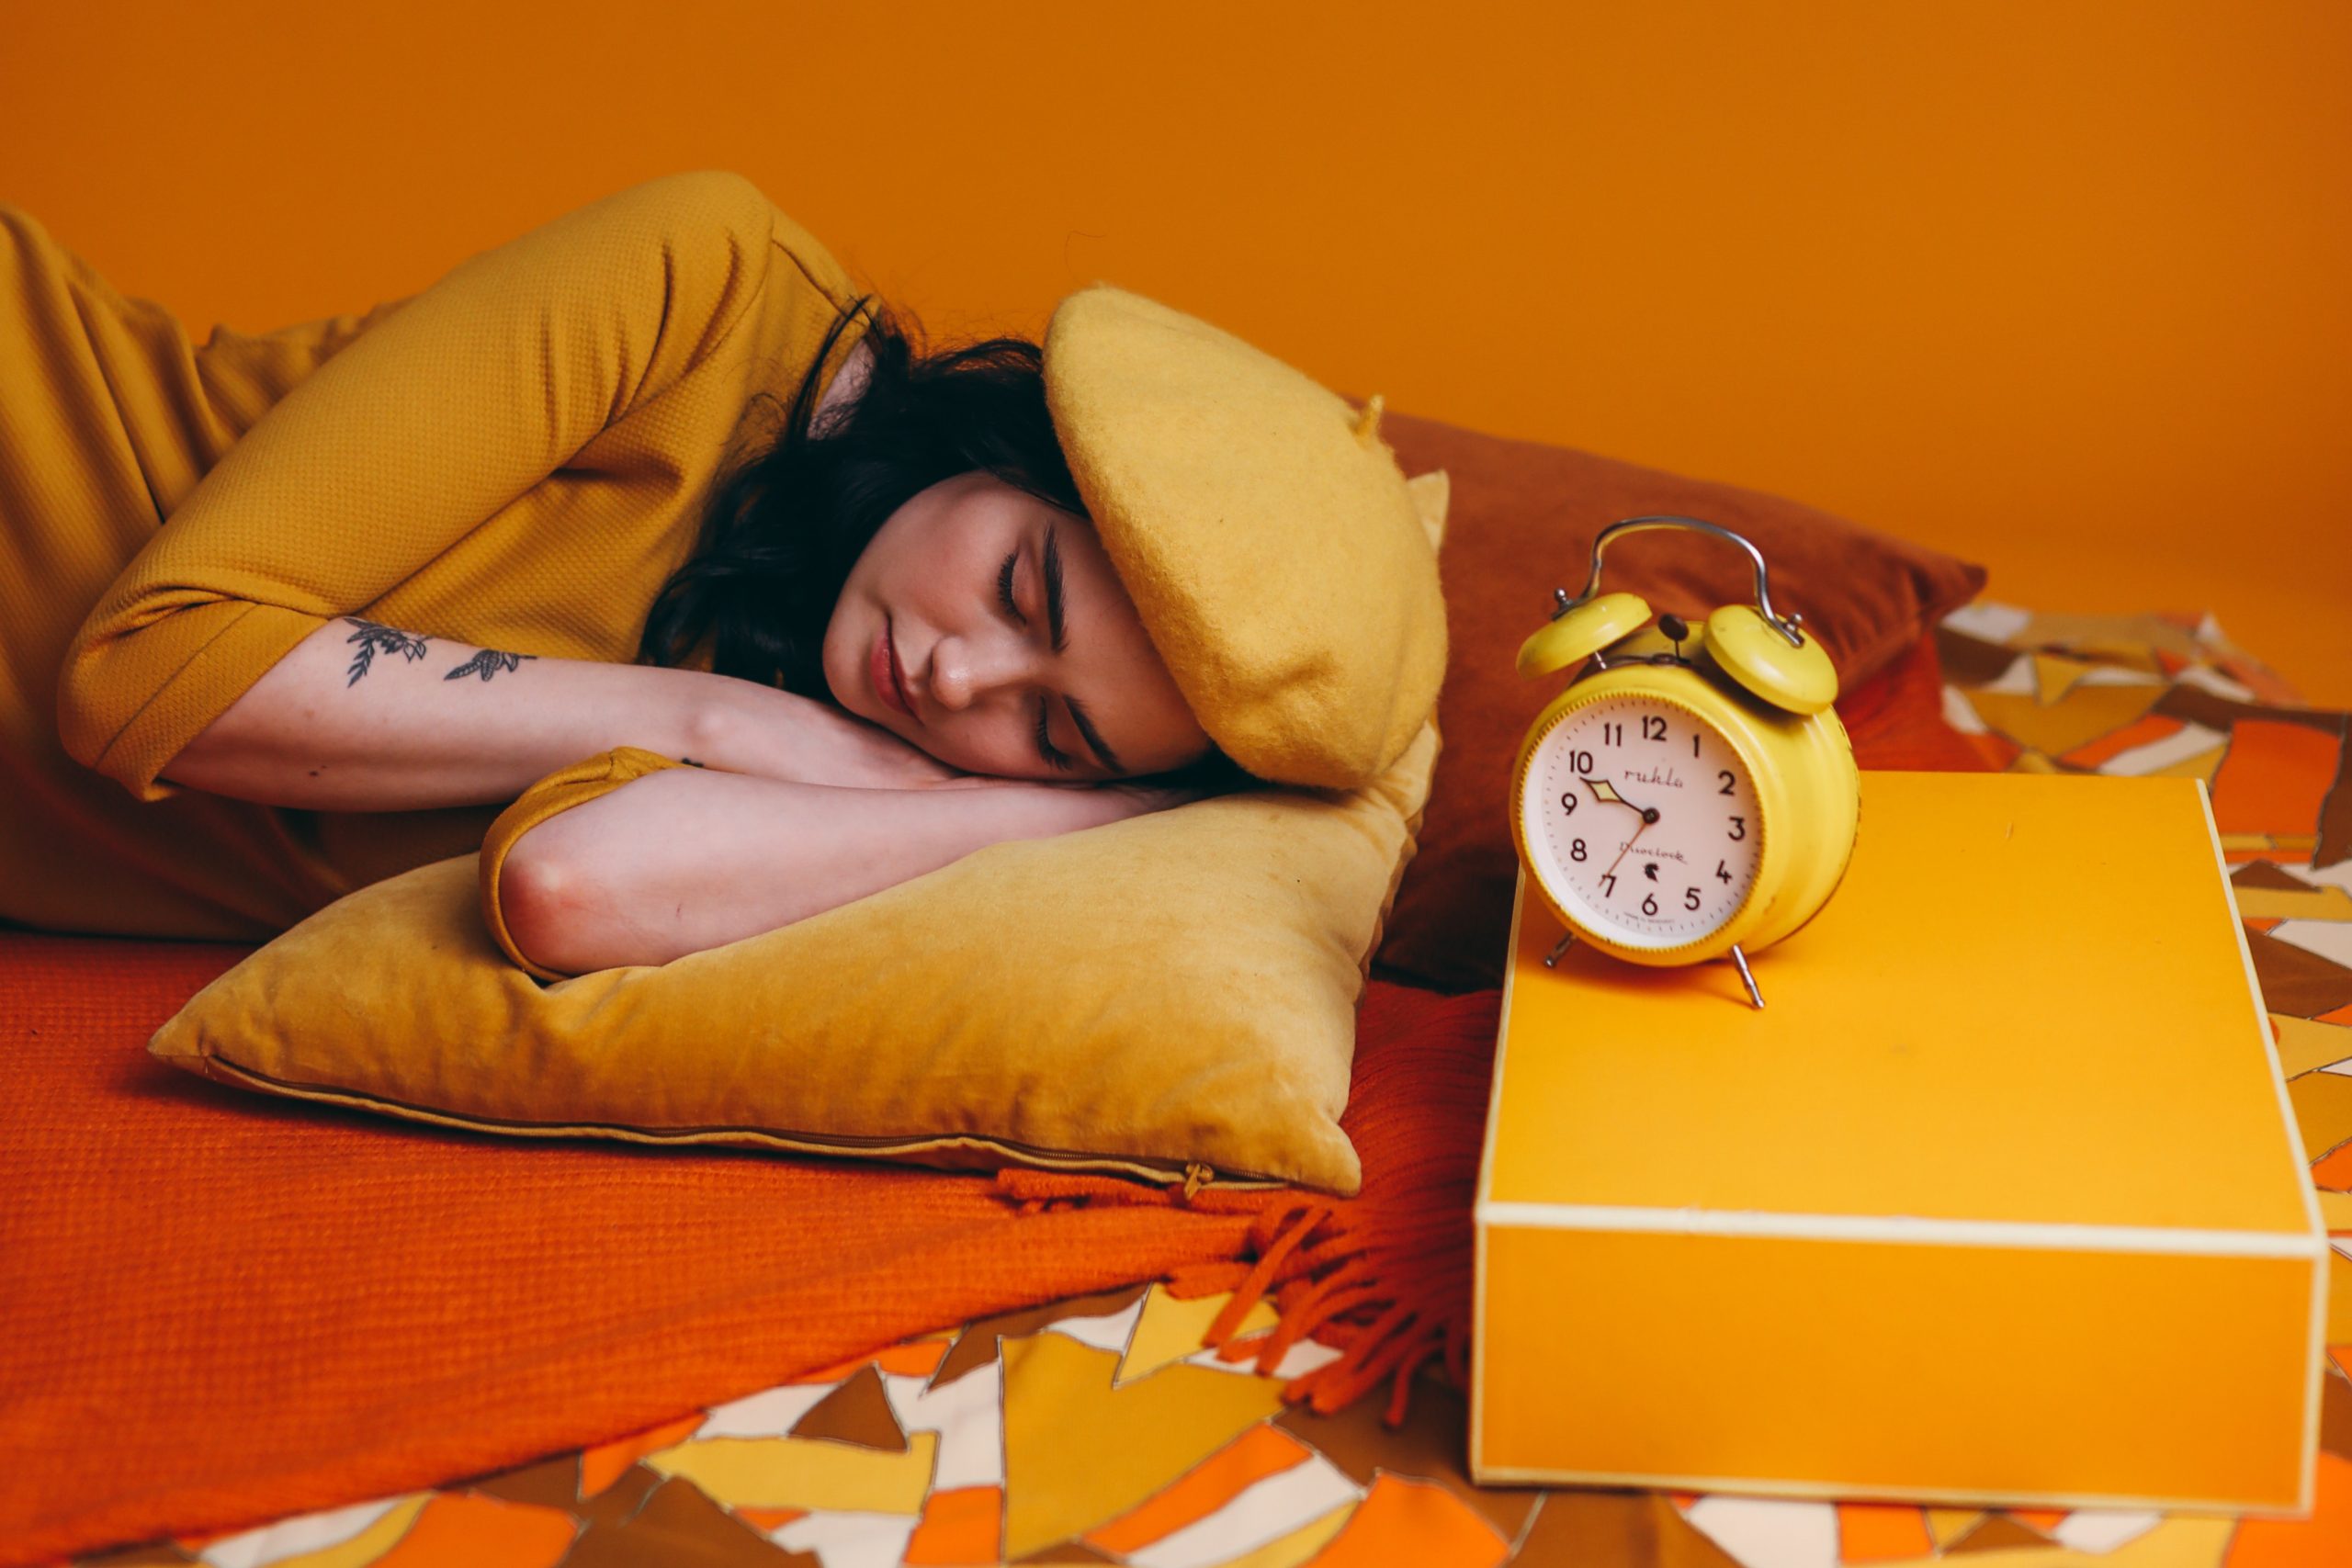 Woman Lying on Bed Beside A Yellow Analog Alarm Clock